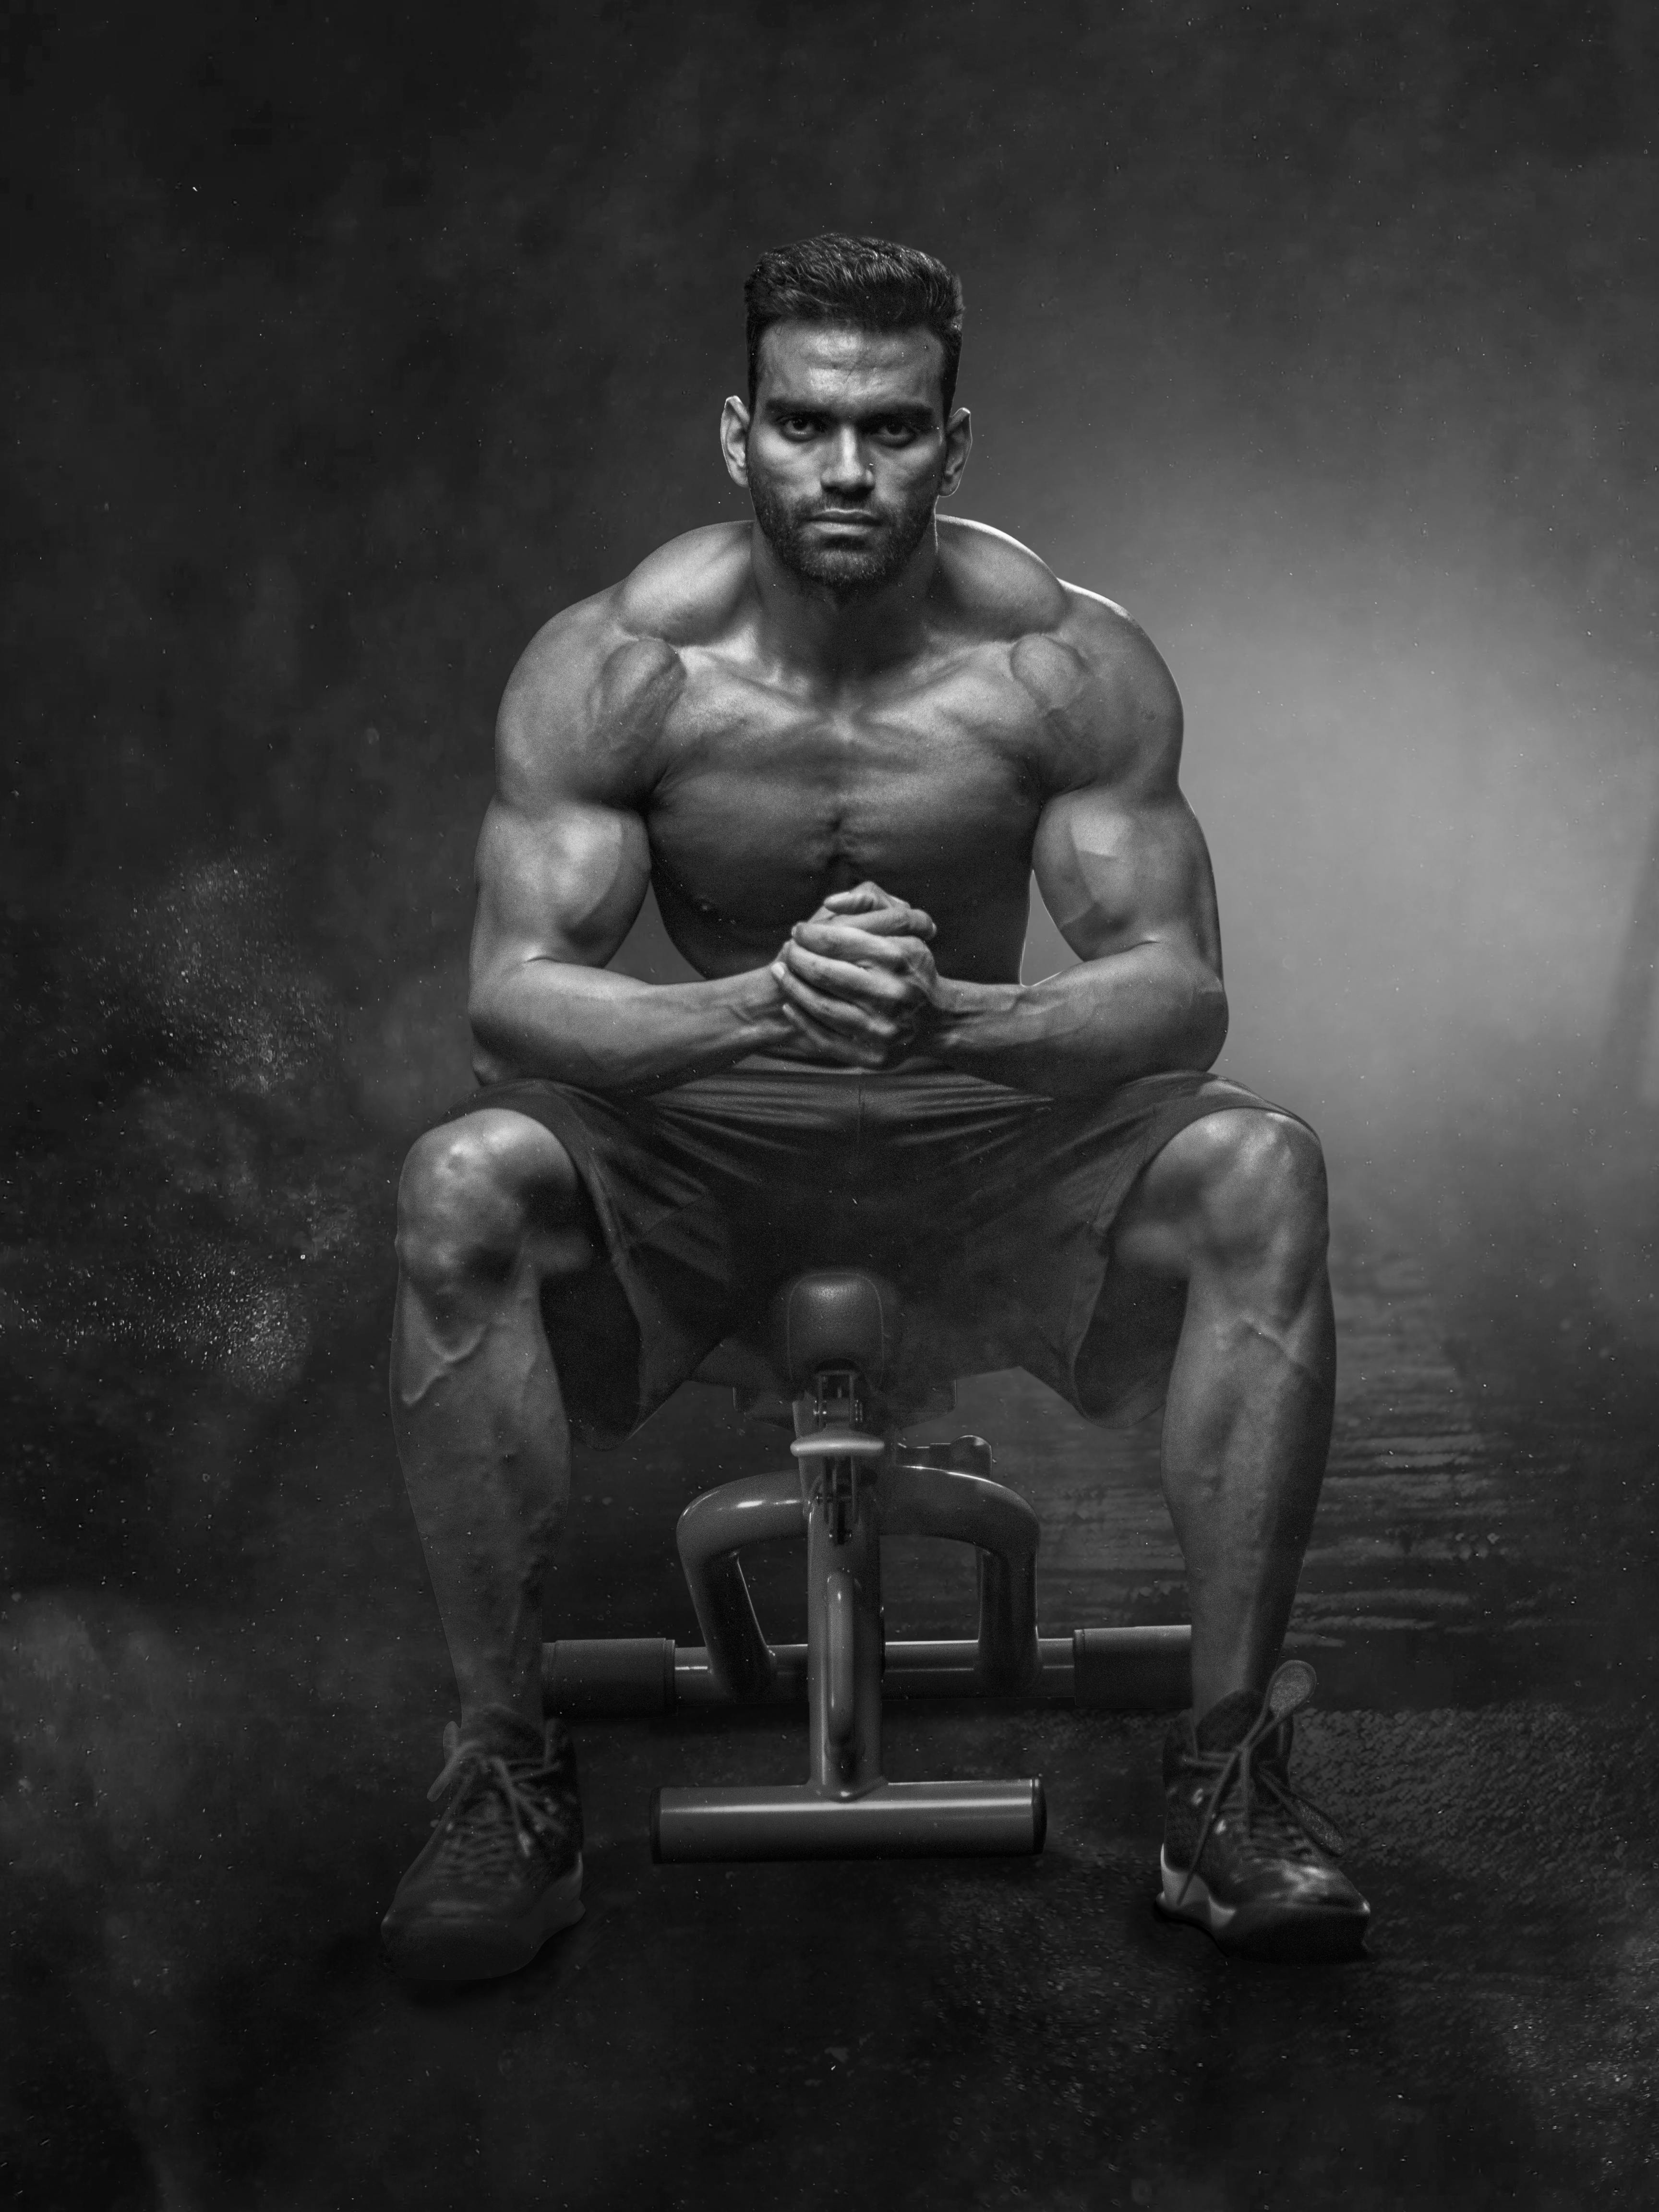 High Quality Fitness Images  Male fitness photography, Gym photography,  Women fitness photography